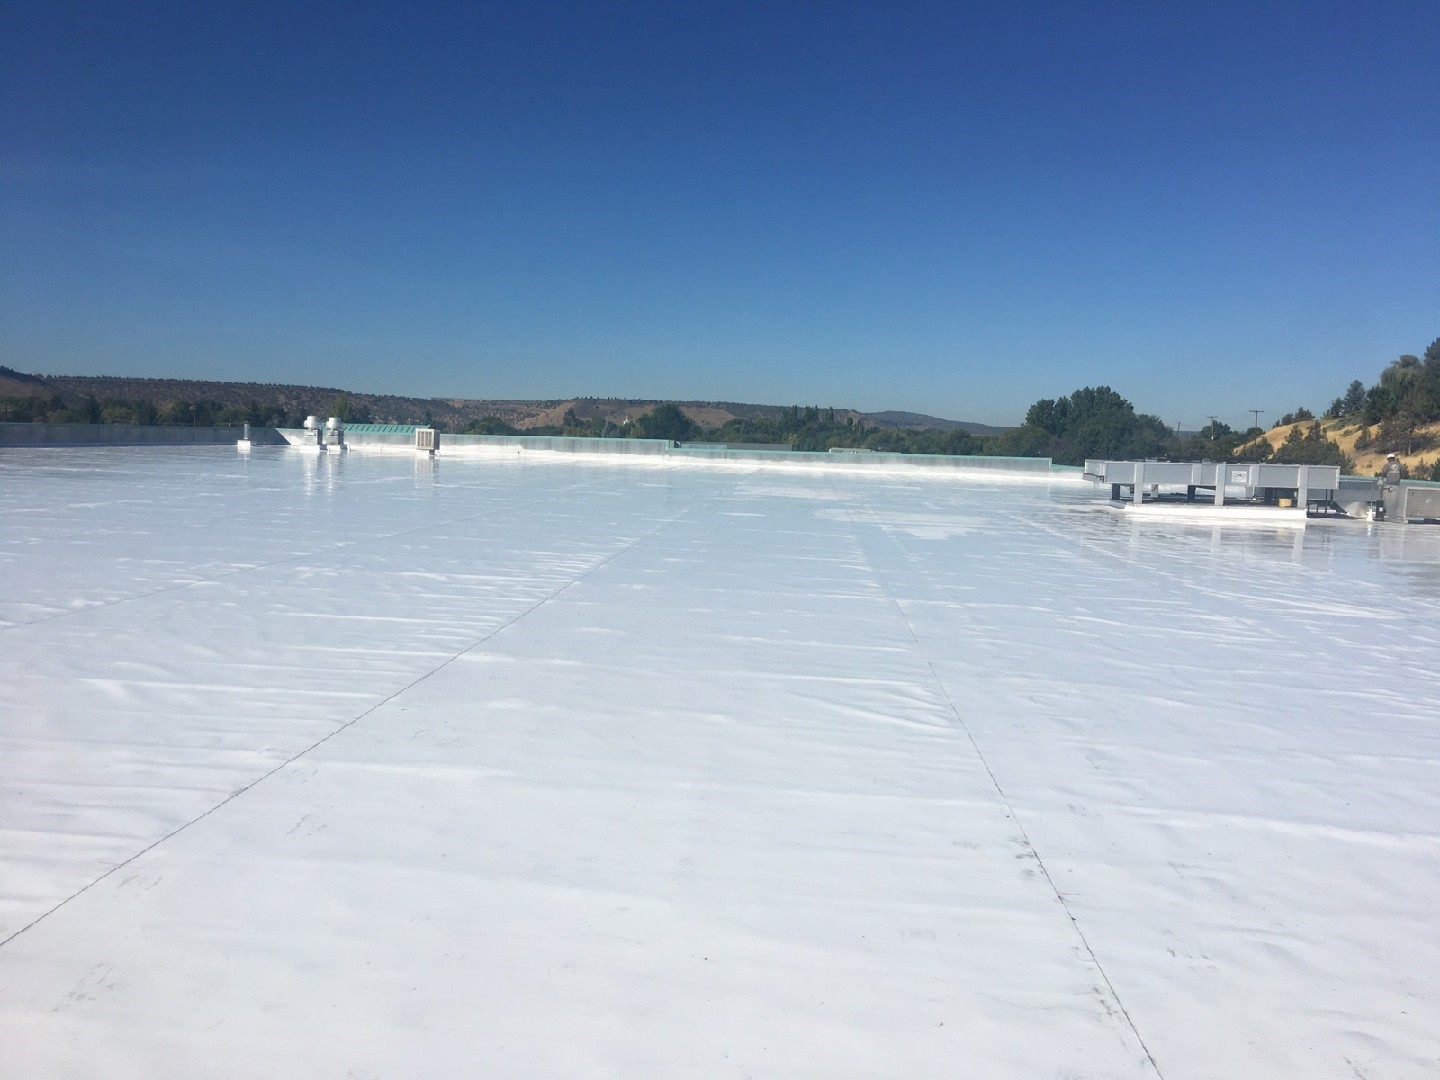 Commercial and Residential Roofing Contractor